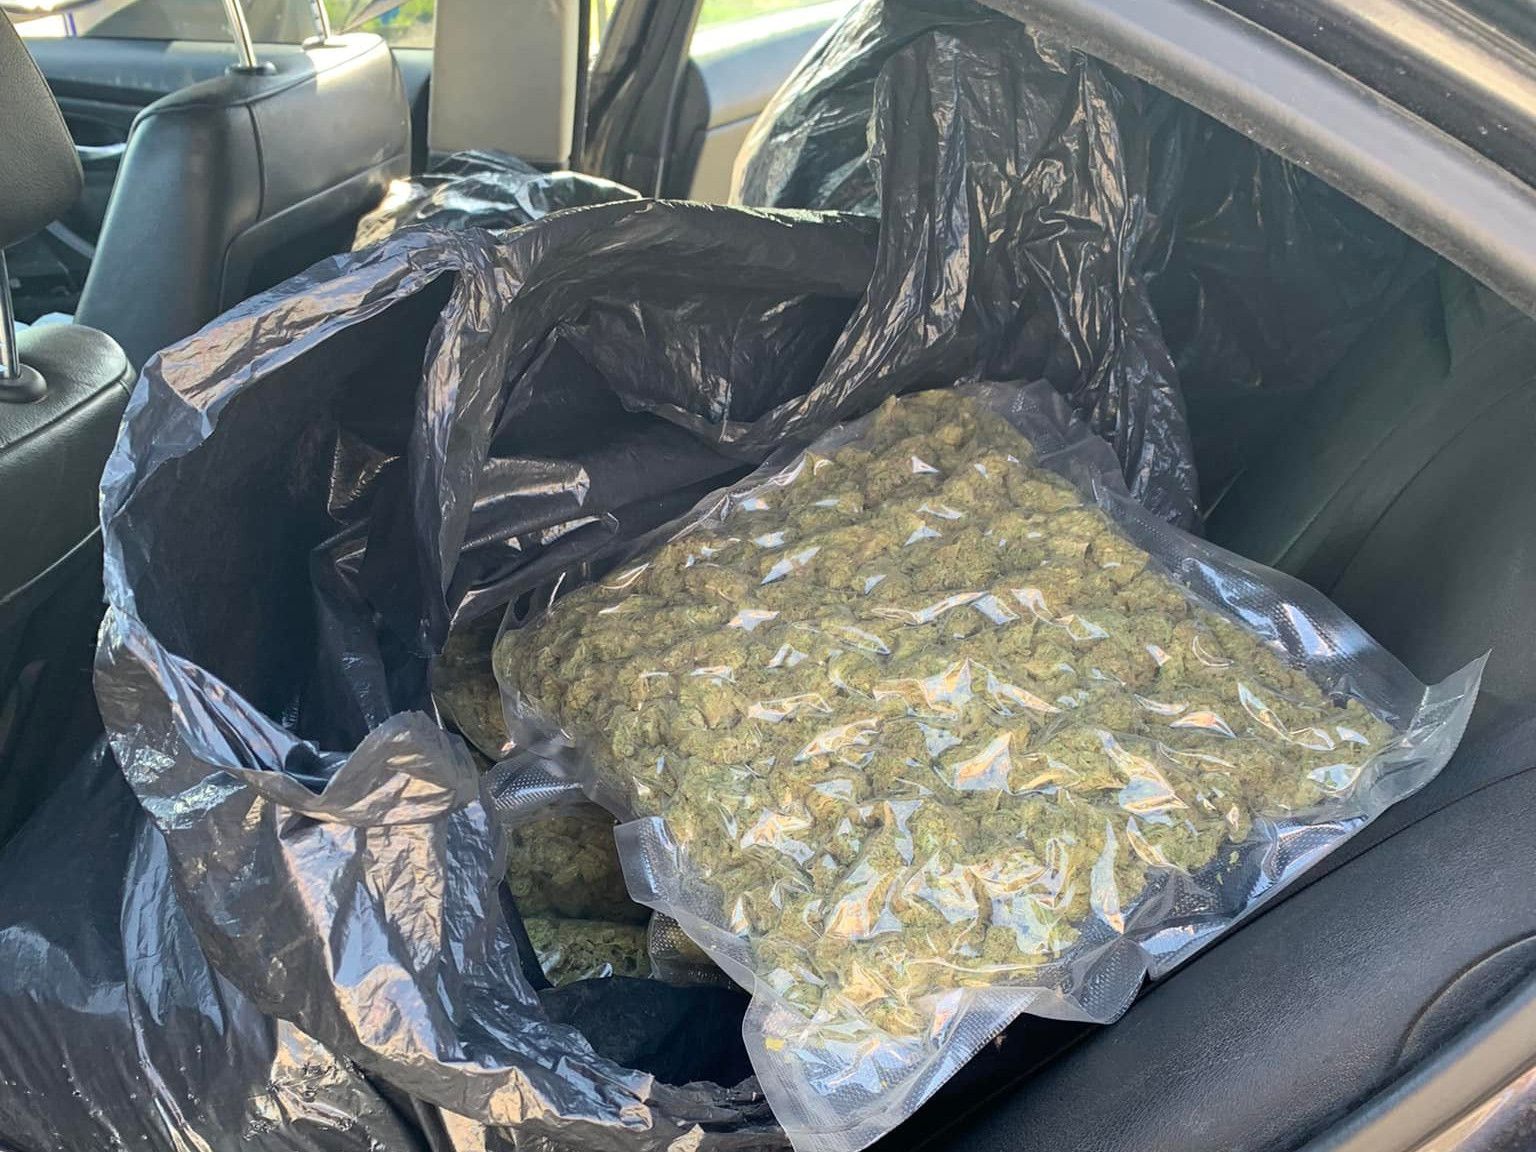  Responding officers discovered about 41 kilograms of processed weed in both the back seat and trunk of the car. /